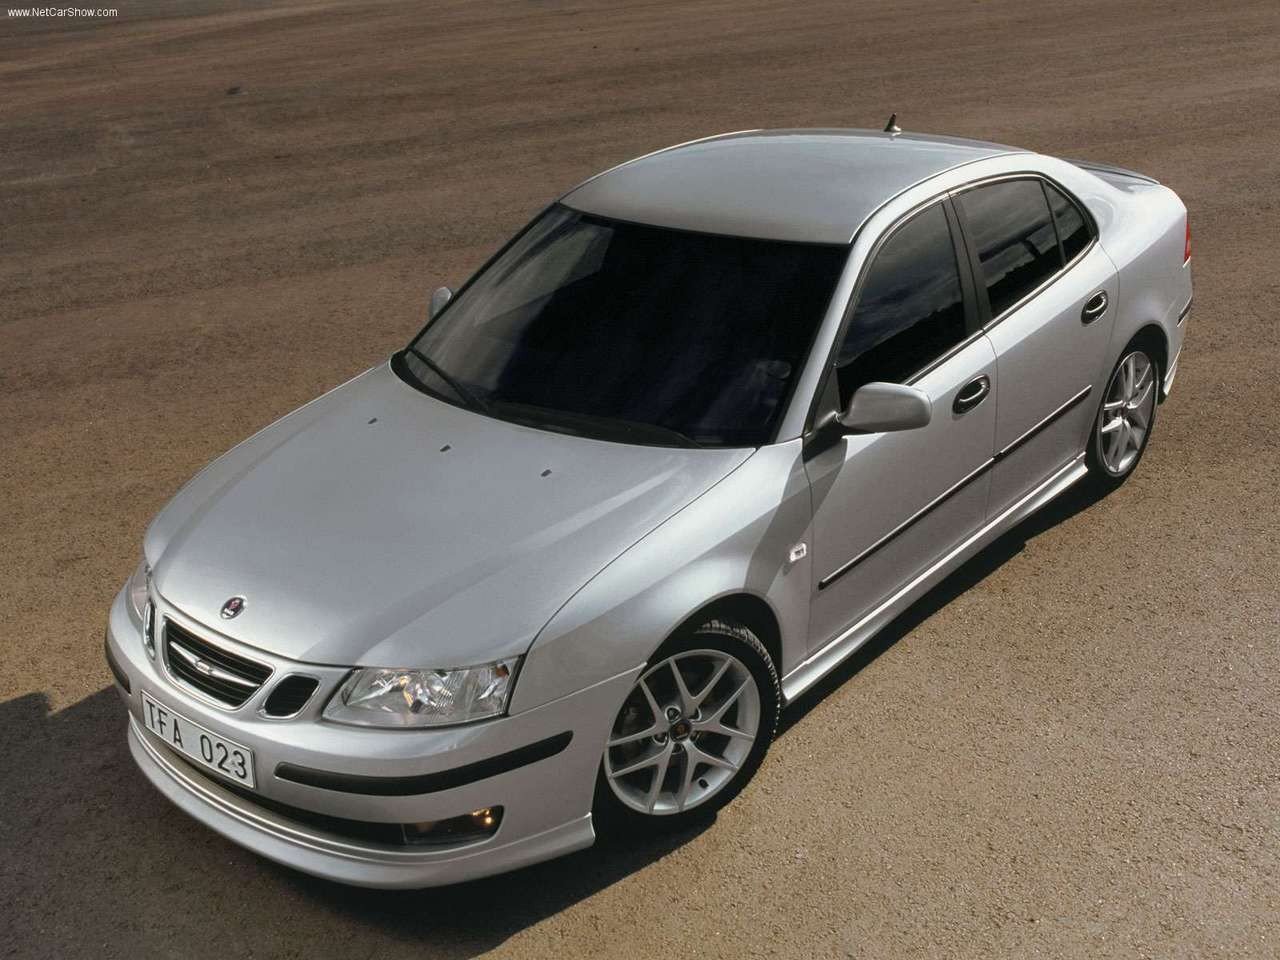 Saab hd wallpapers desktop and mobile images photos